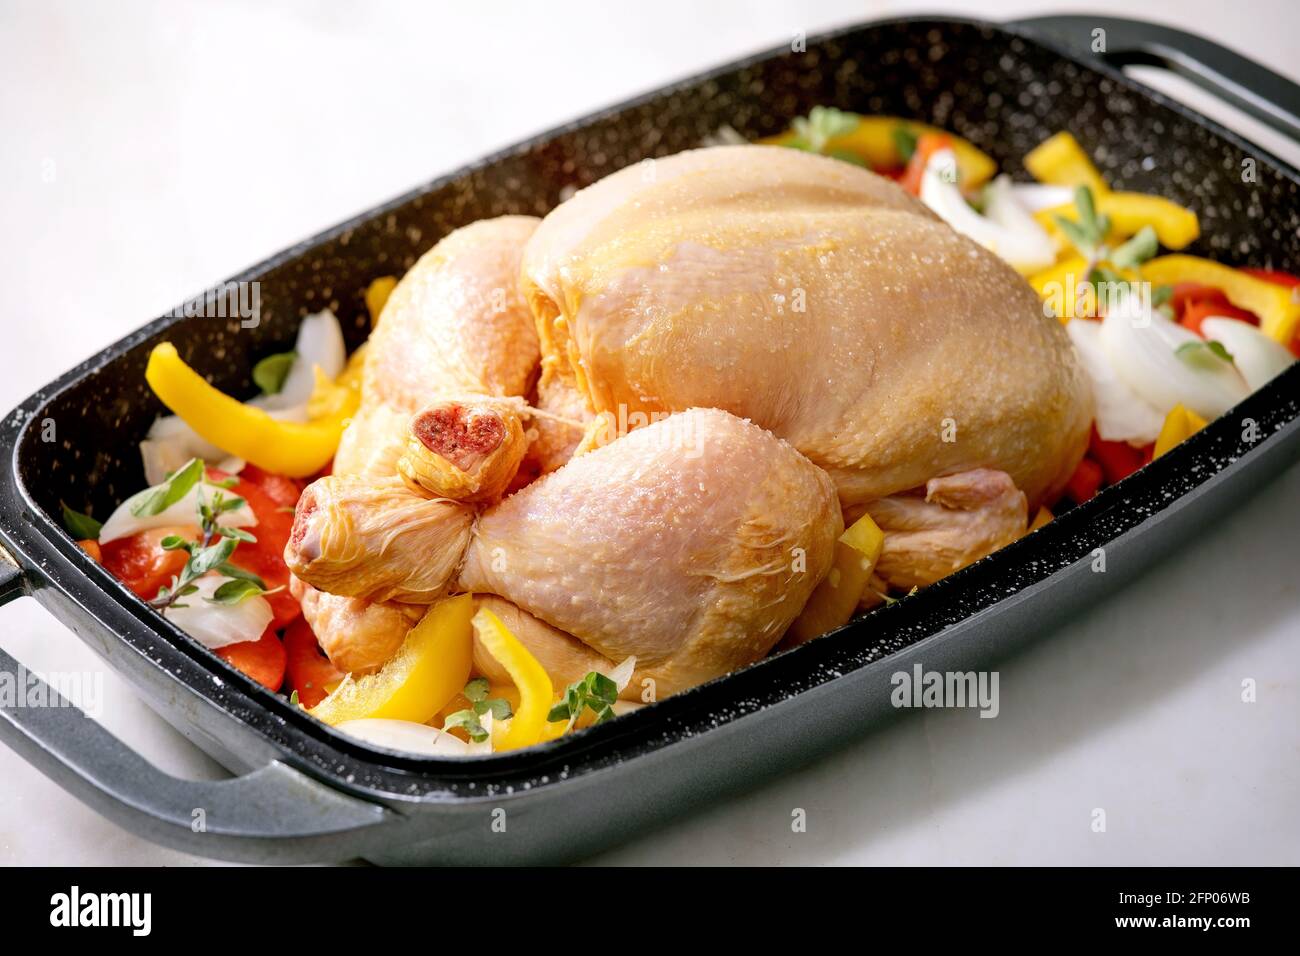 Raw organic uncooked whole chicken with sliced vegetables bell pepper, onion and herbs in oven tray, ready to cook. White marble table. Stock Photo